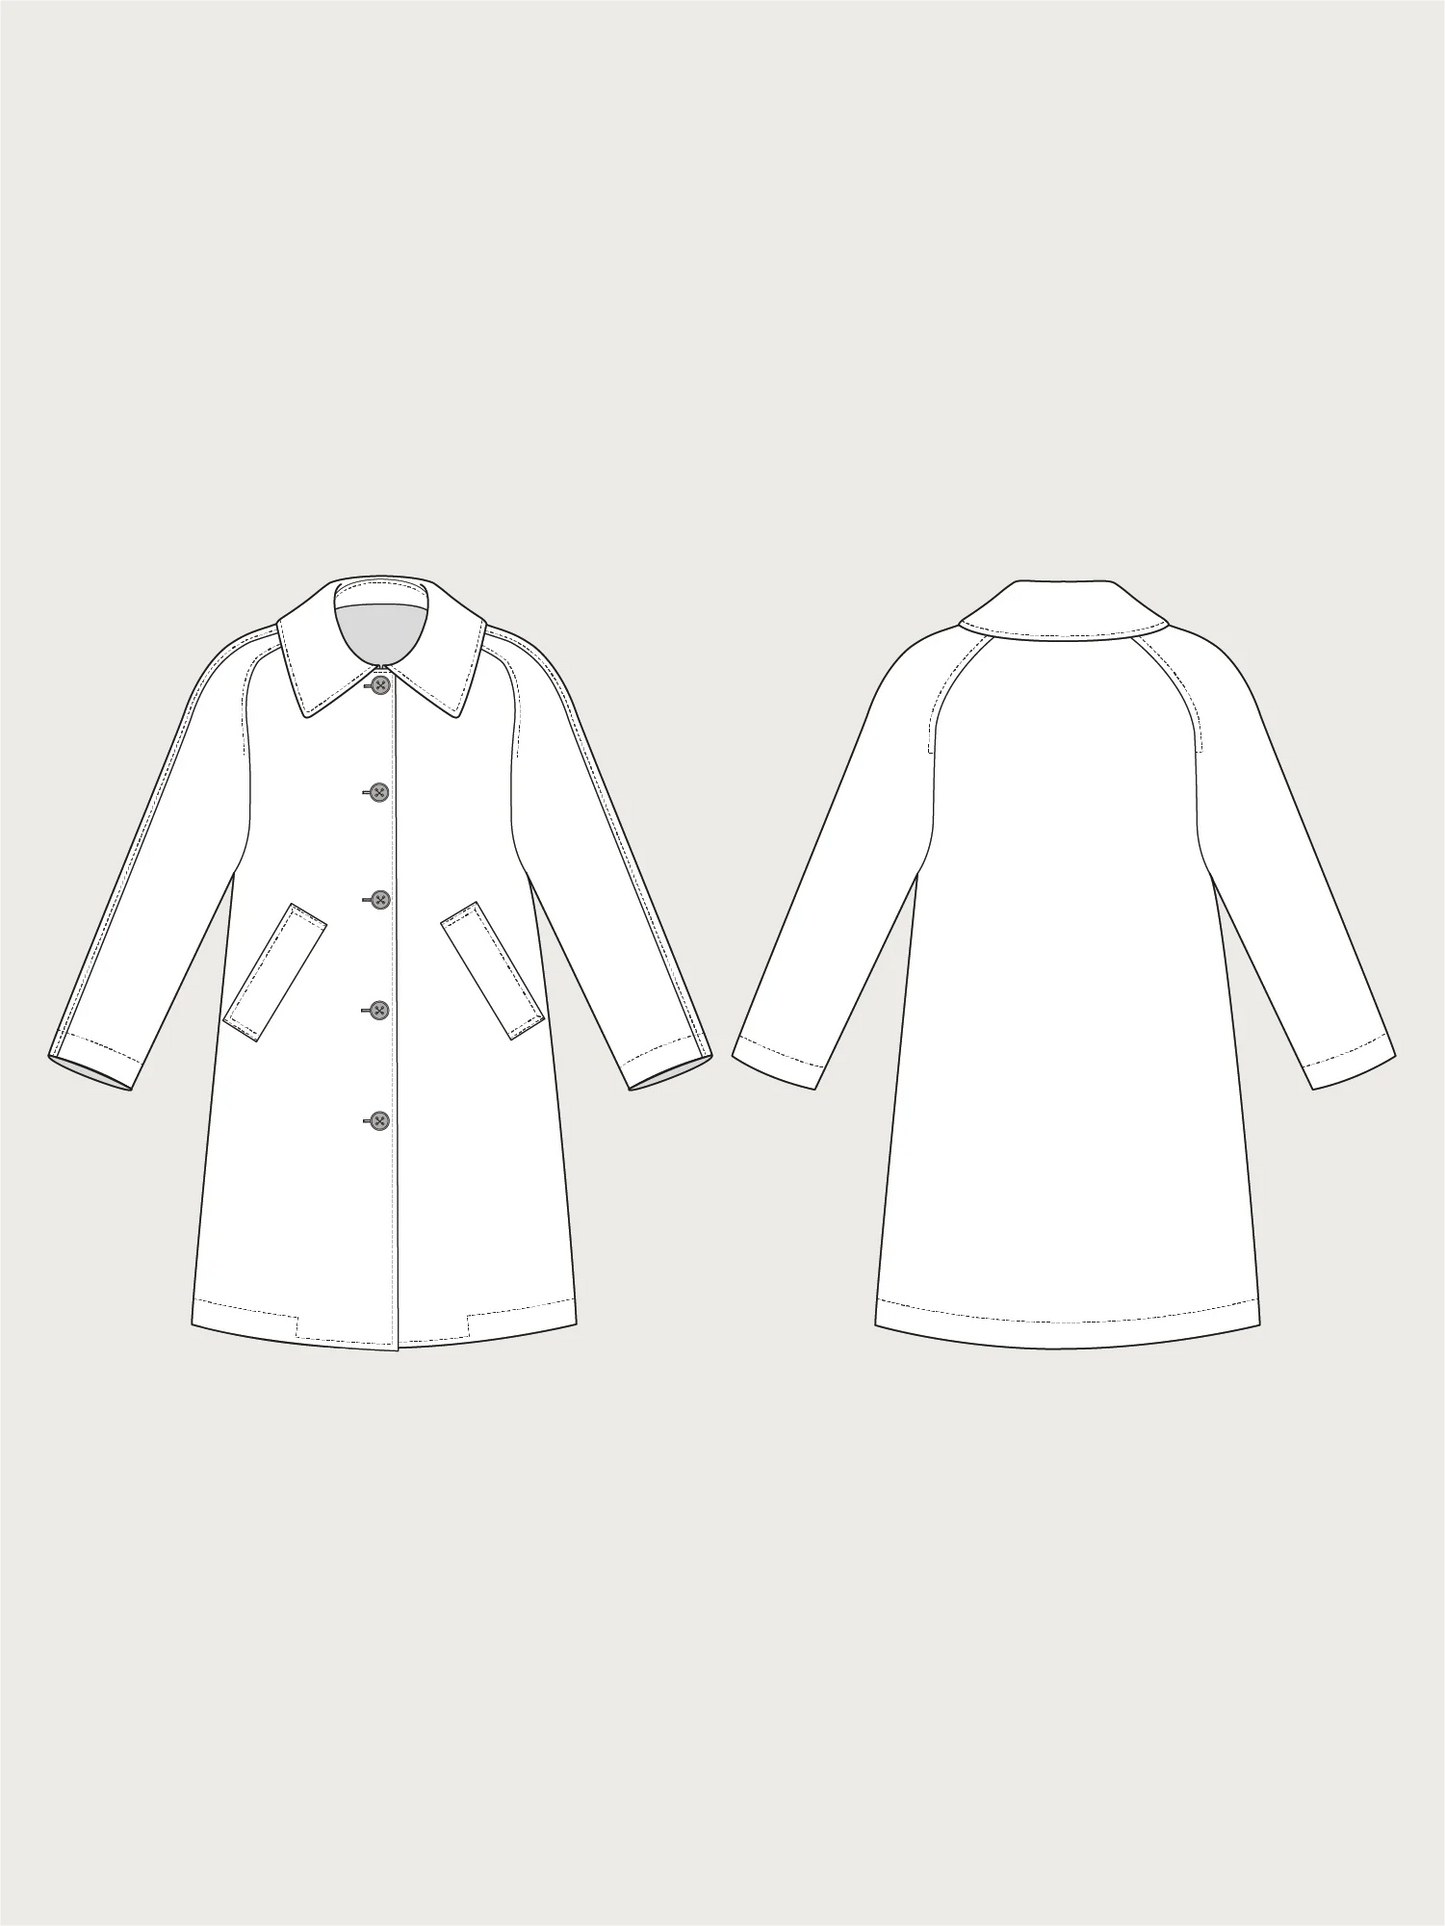 Car Coat Pattern by The Assembly Line